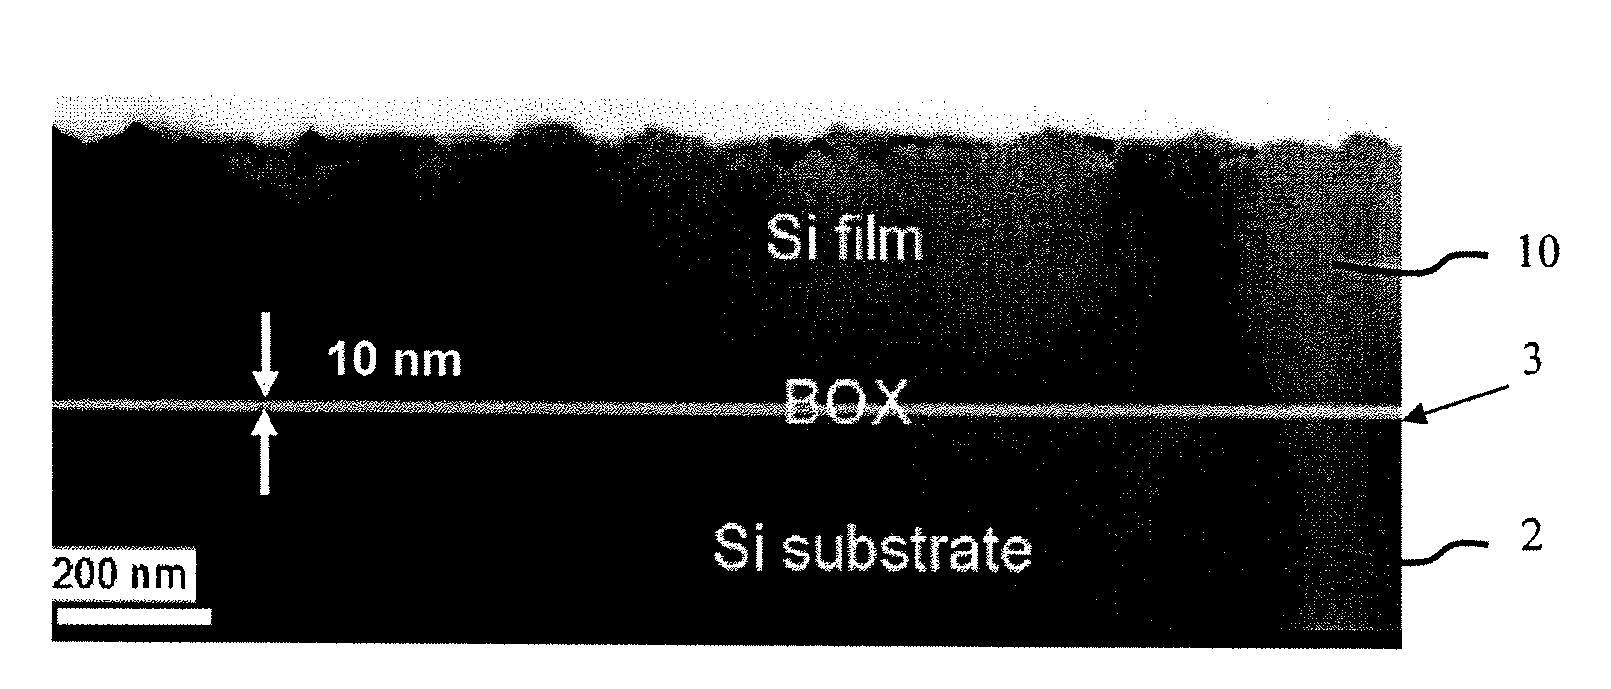 Soi substrates with a fine buried insulating layer